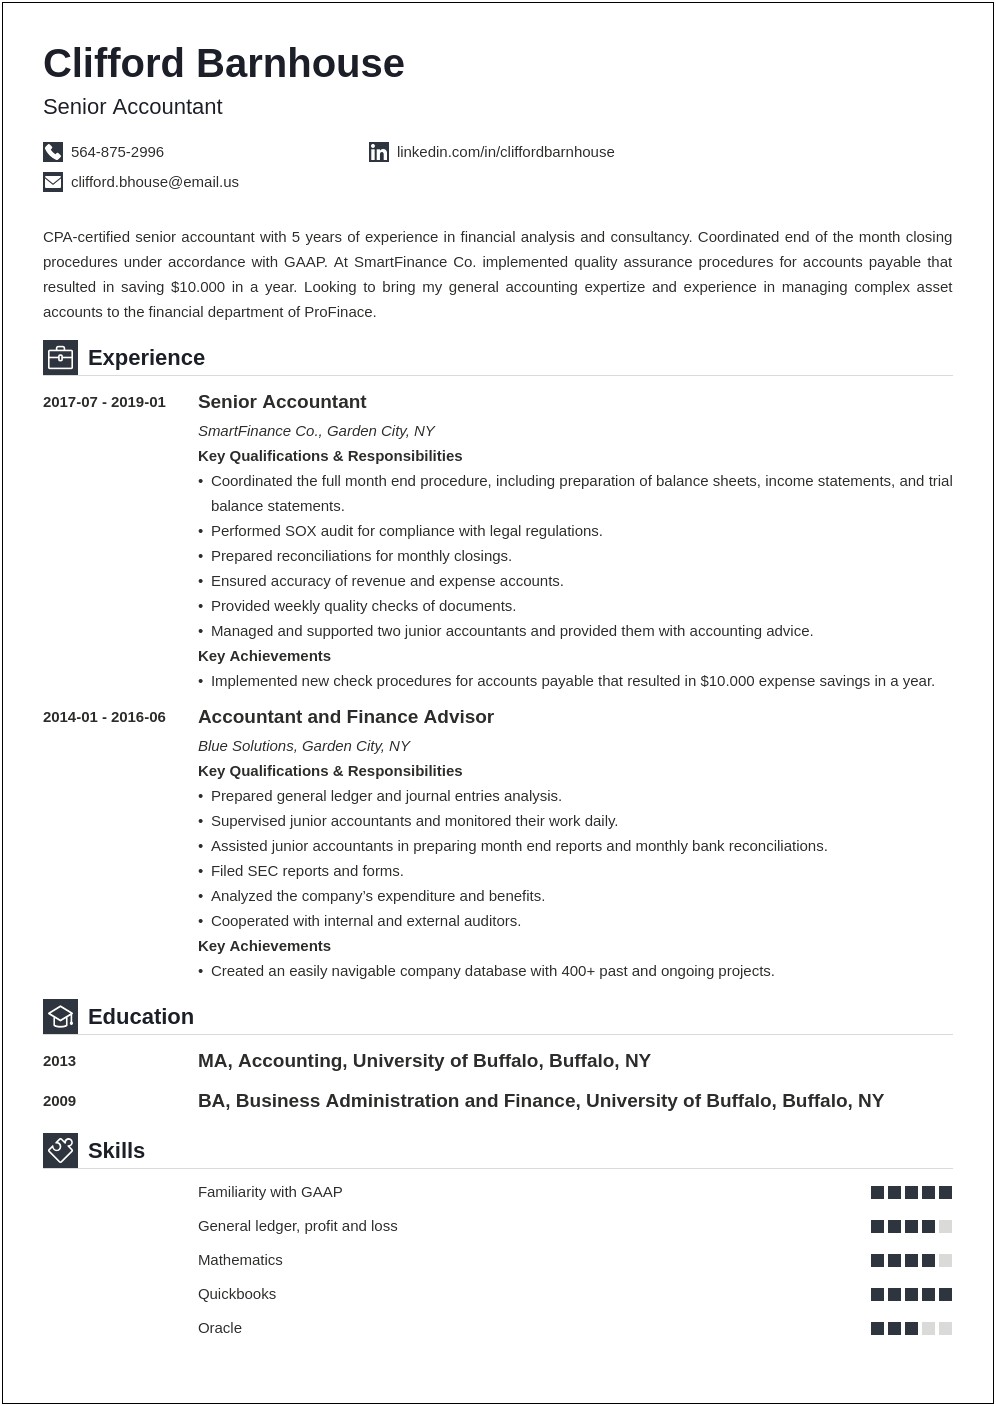 Best Resume Sample For Staff Accountant